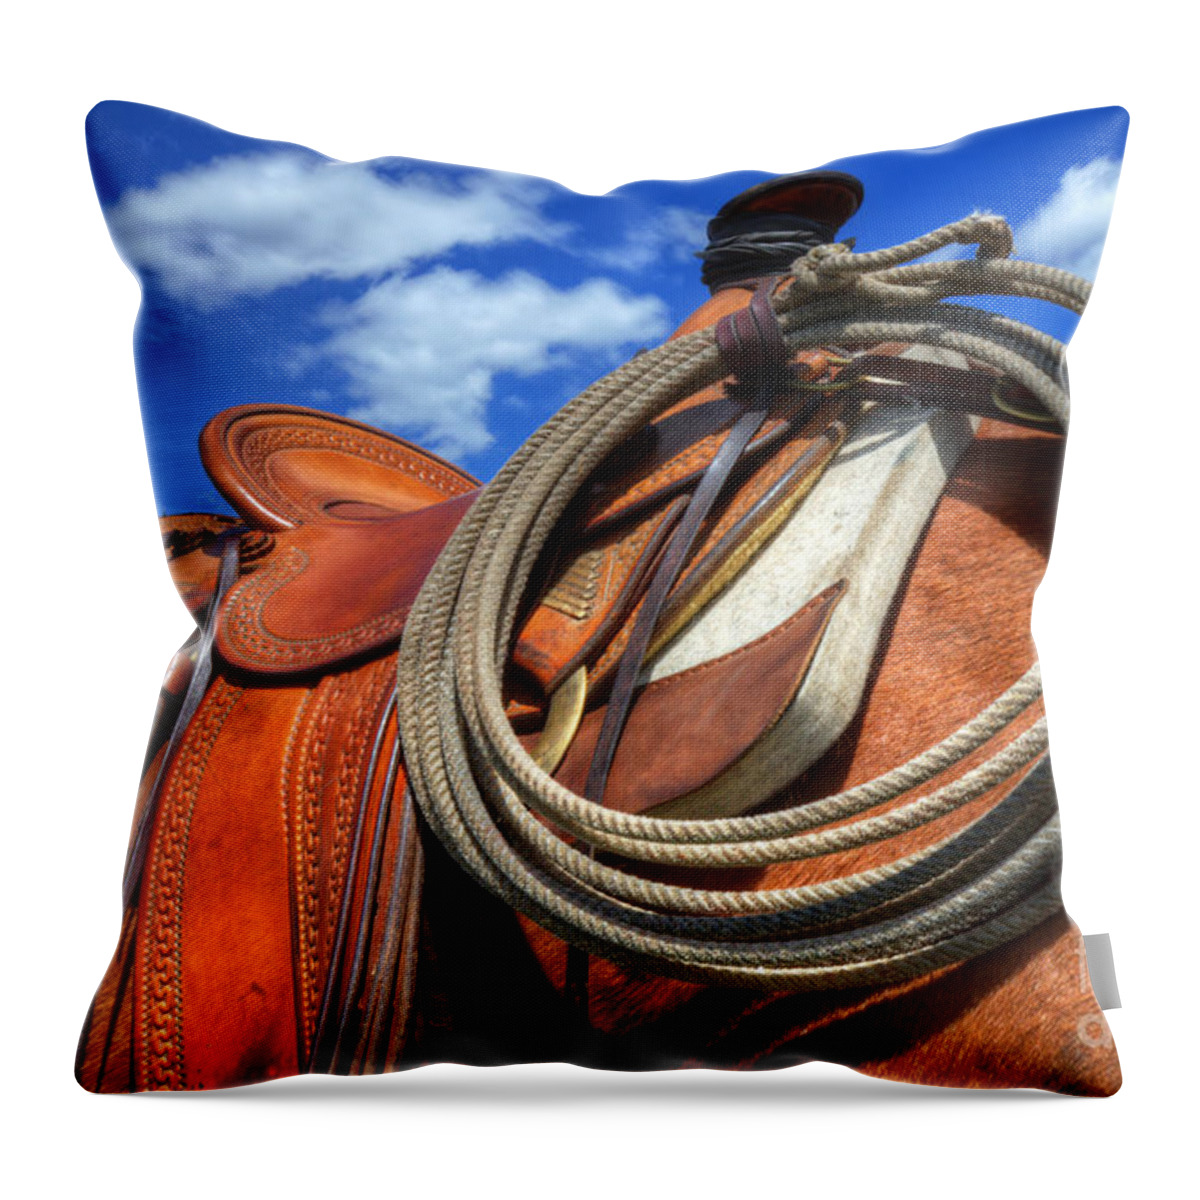  Horse Throw Pillow featuring the photograph Saddle Up by Bob Christopher